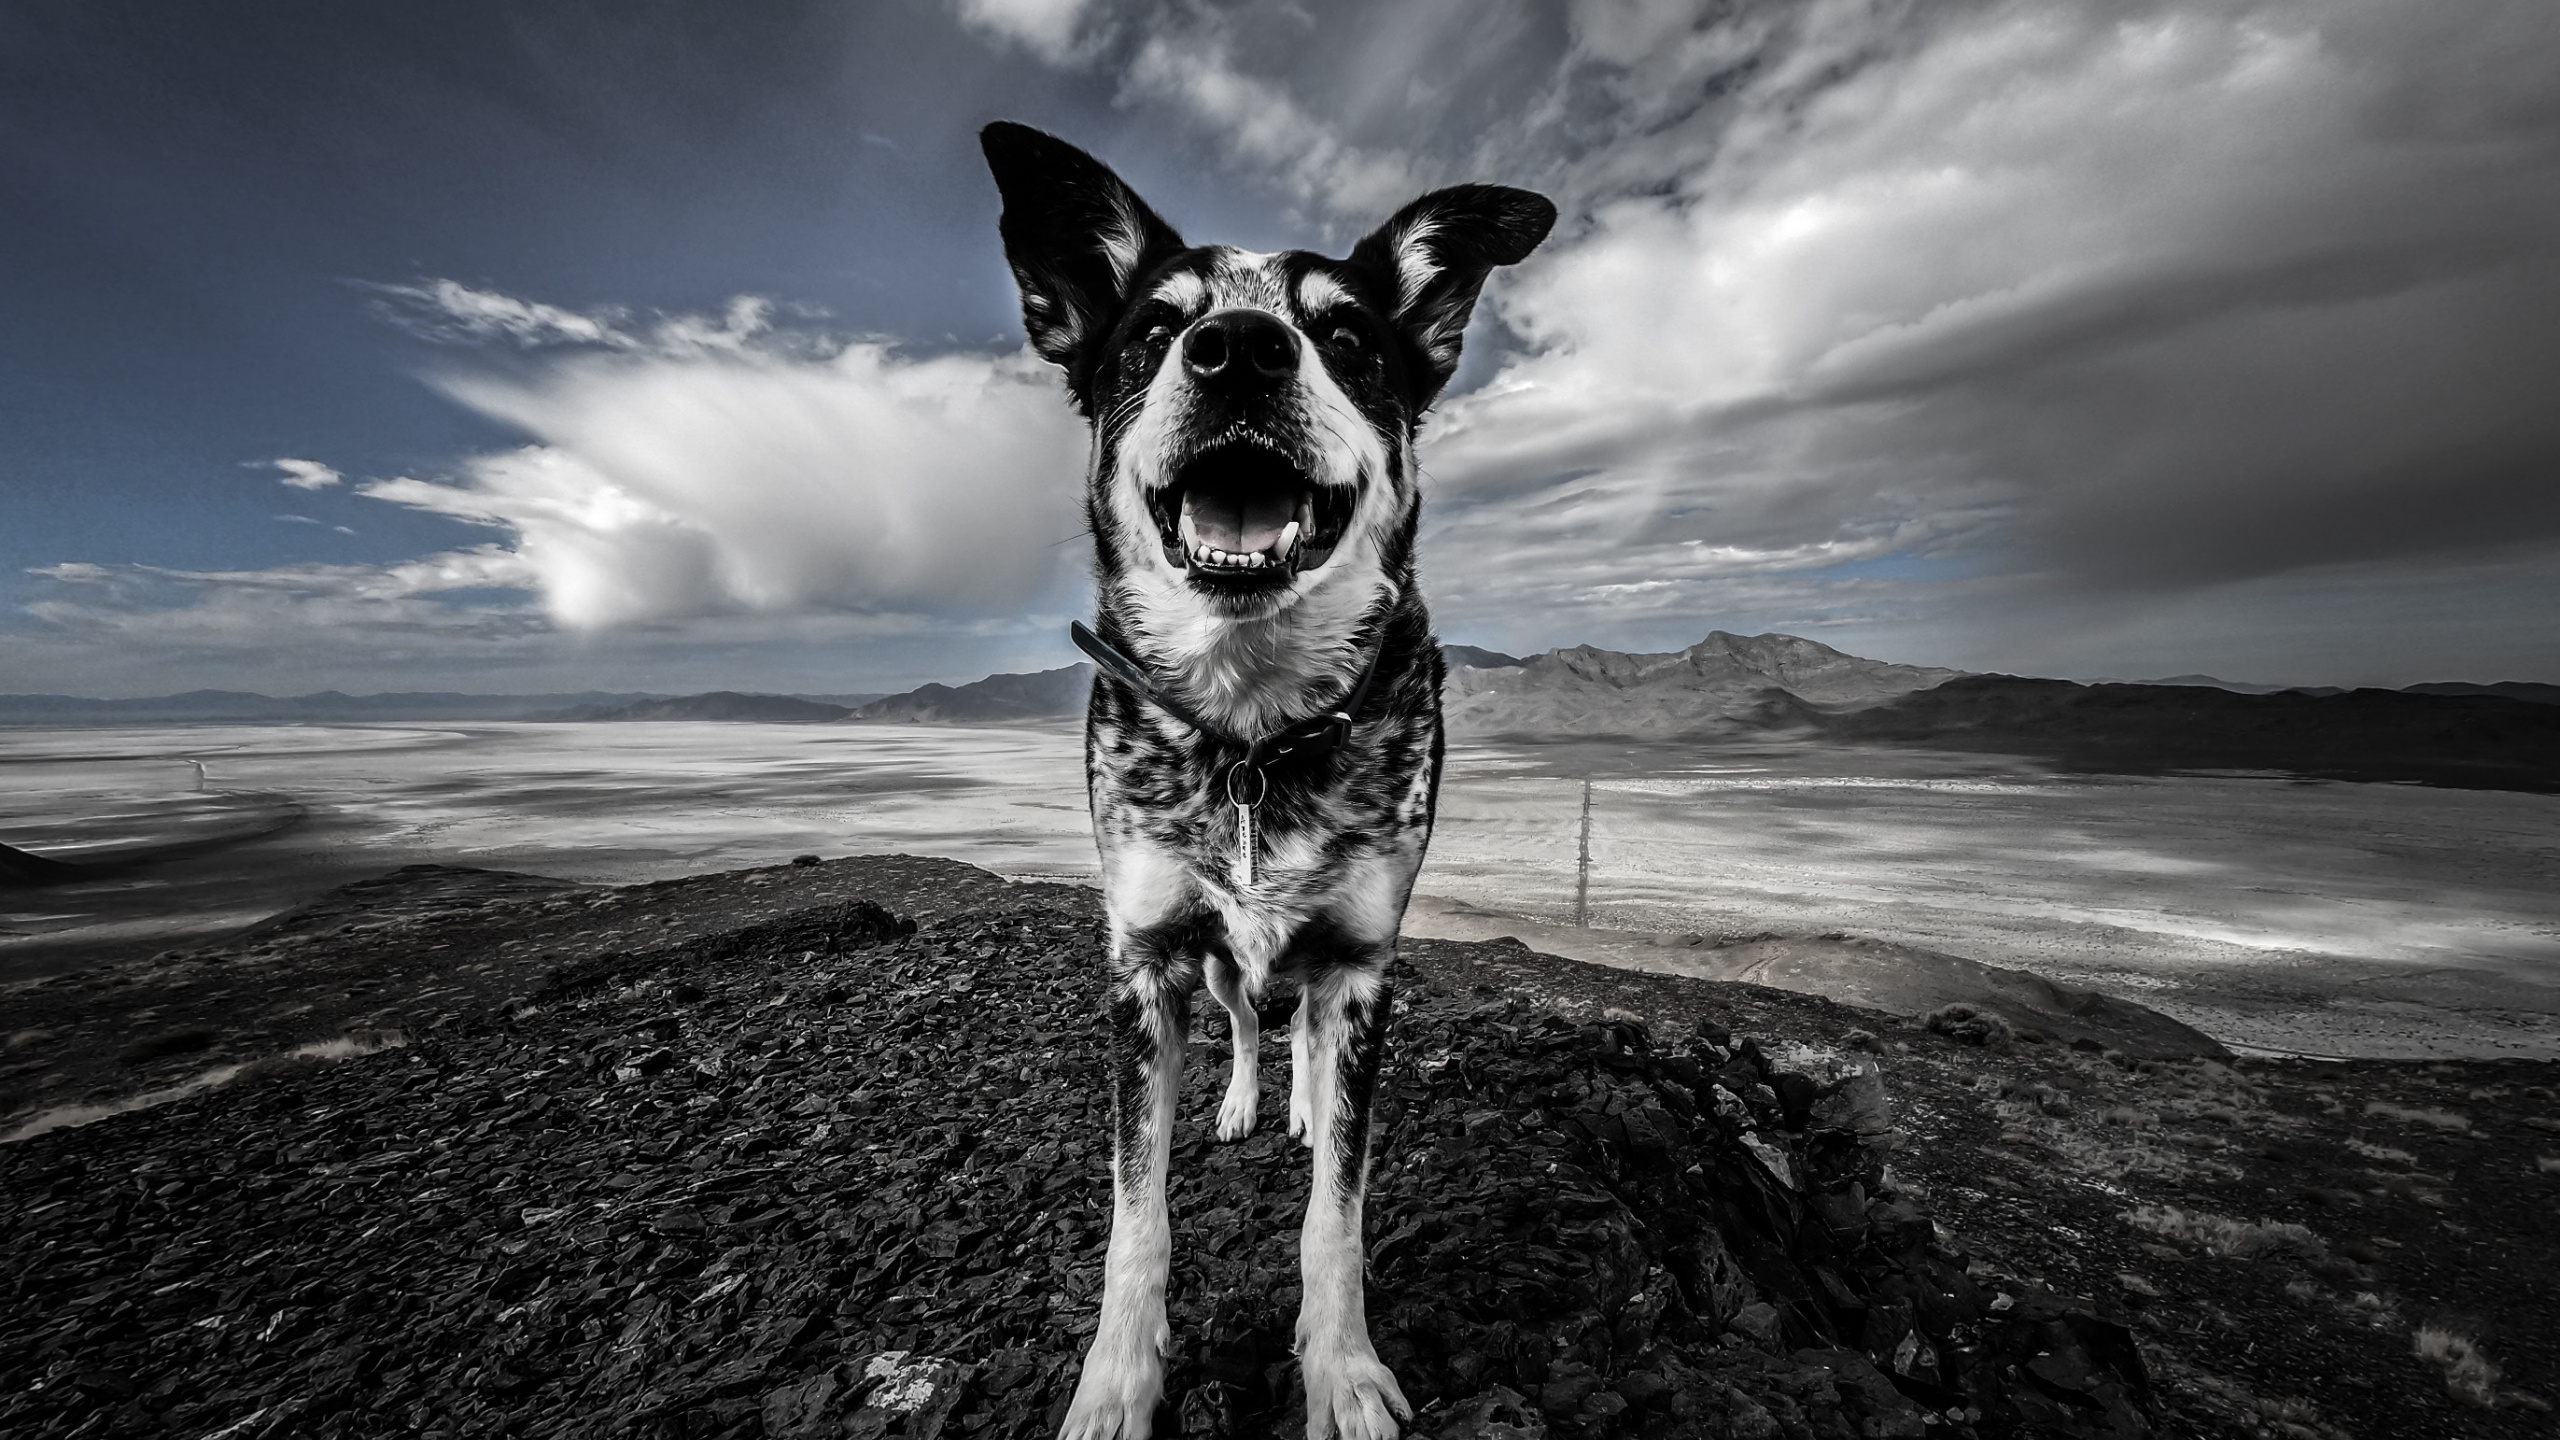 Black and White Dog on Brown Sand Under Blue Sky. Wallpaper in 2560x1440 Resolution